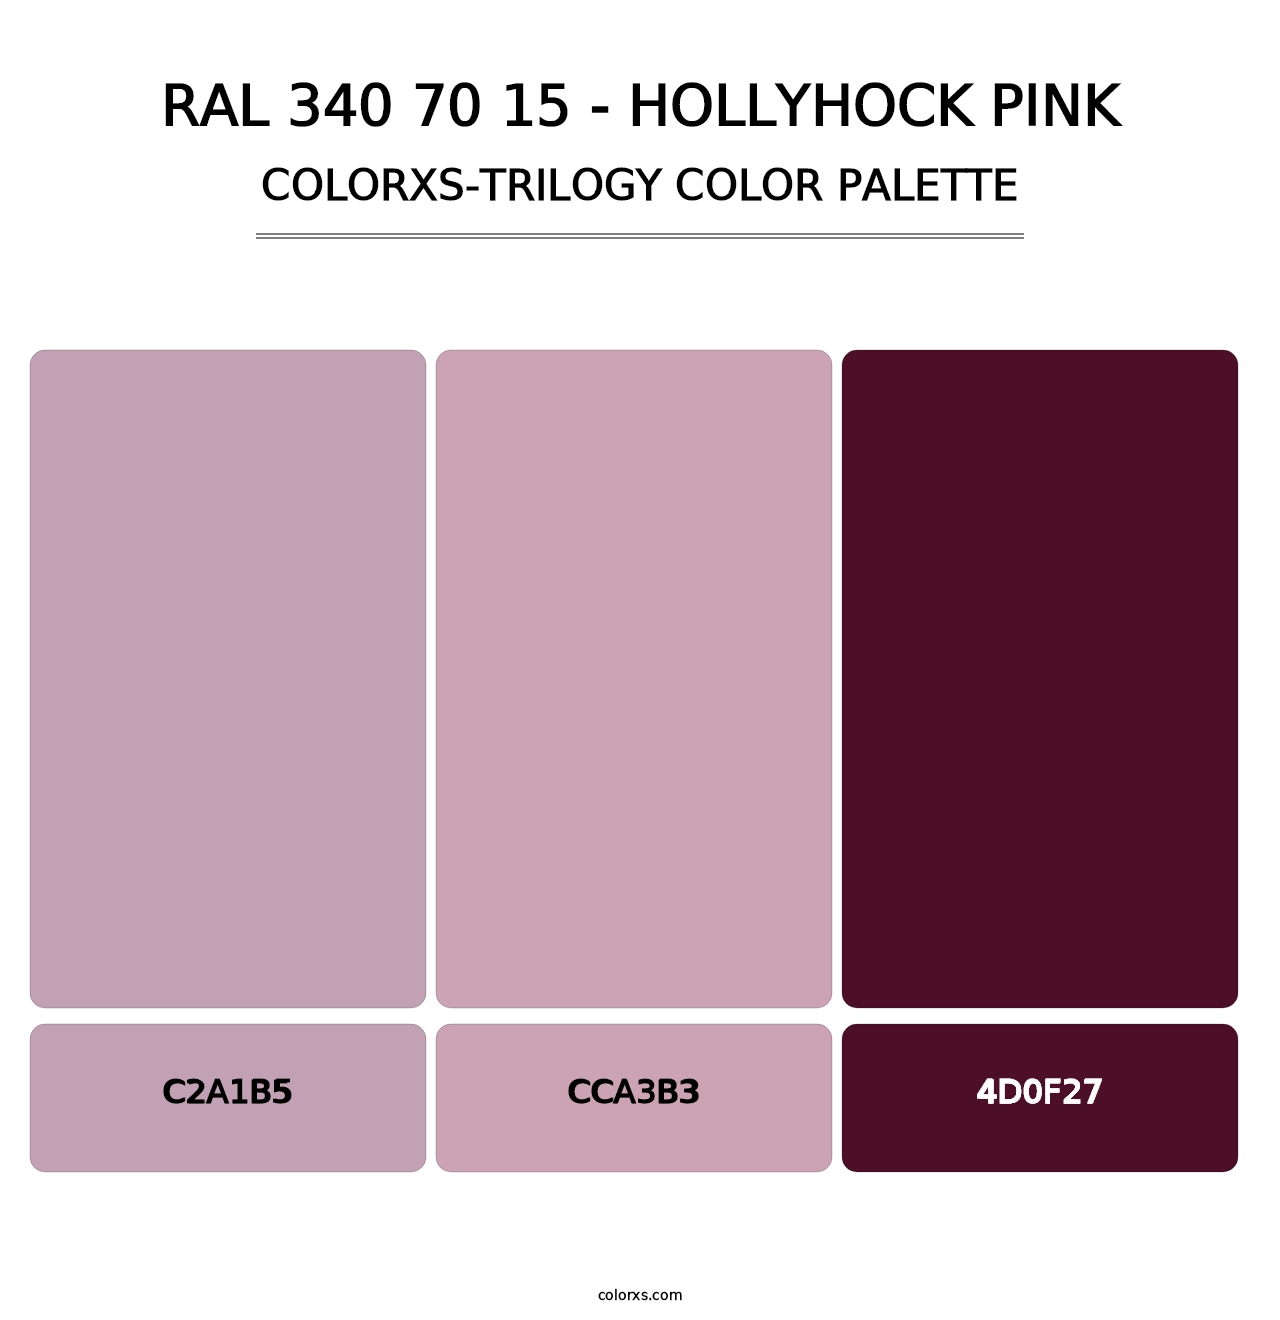 RAL 340 70 15 - Hollyhock Pink - Colorxs Trilogy Palette